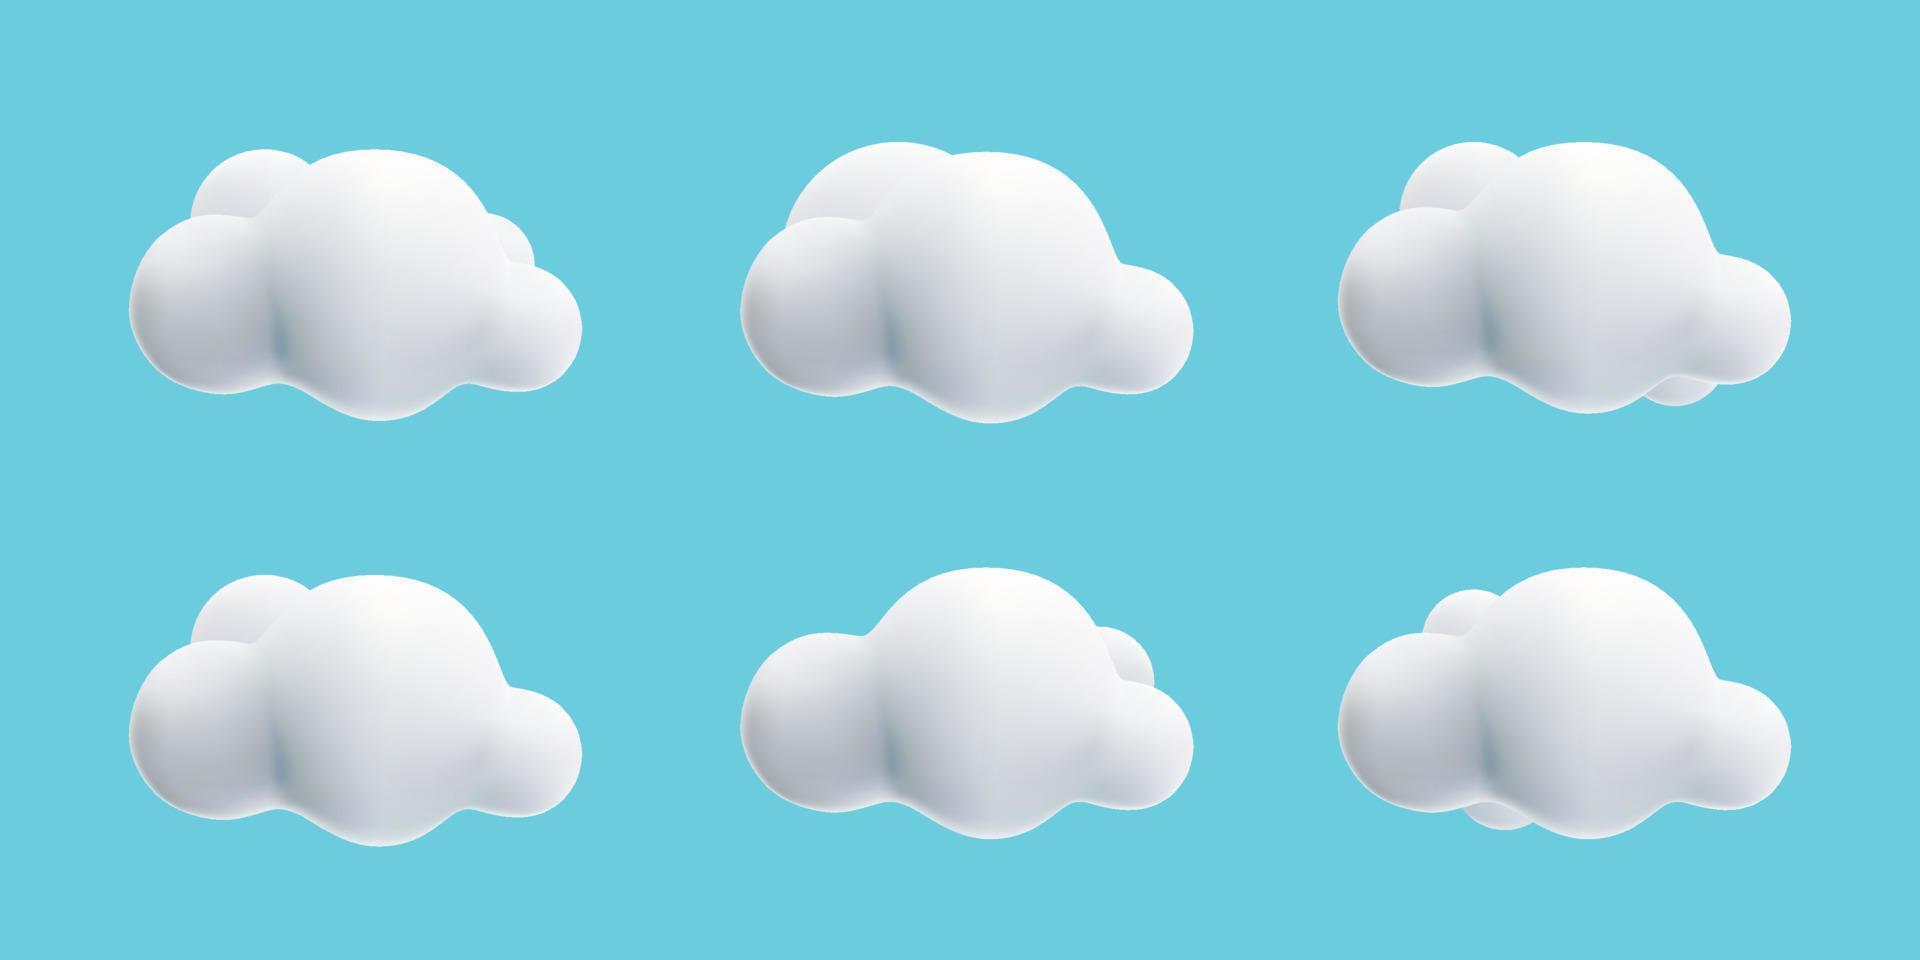 3d white fluffy cloud cartoon style collection set on blue sky vector